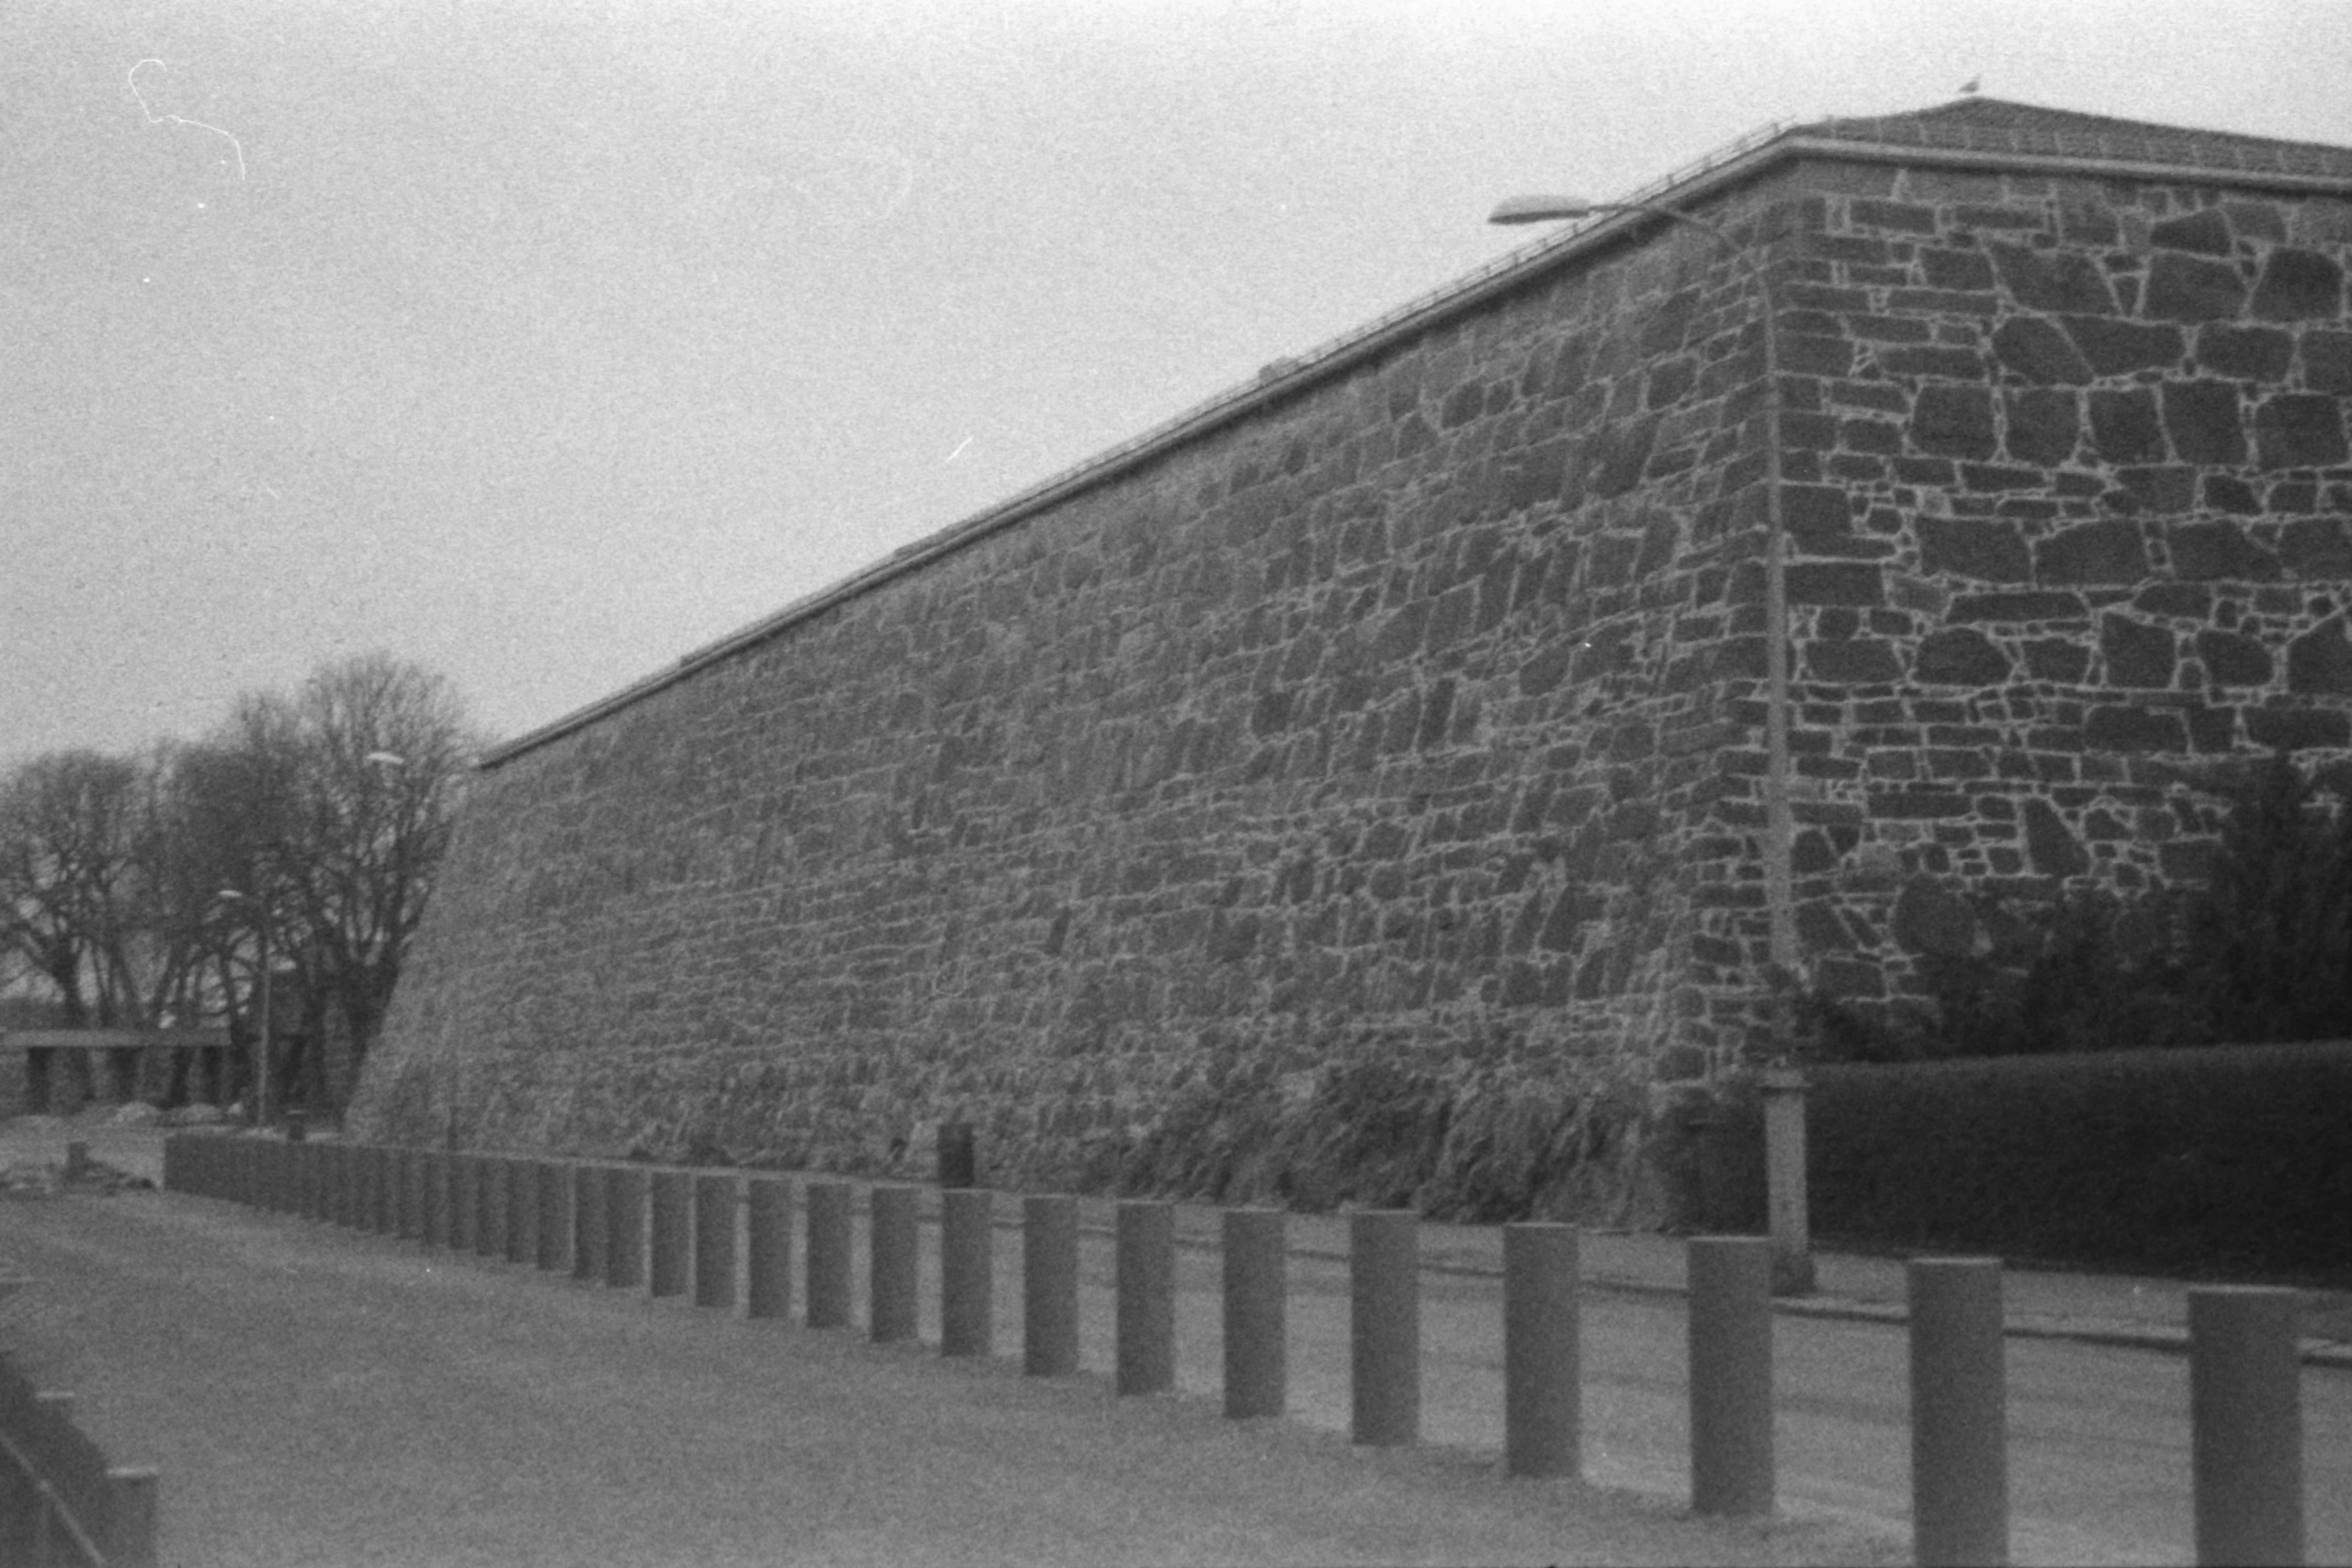 Black and white picture of a large, wall-like building